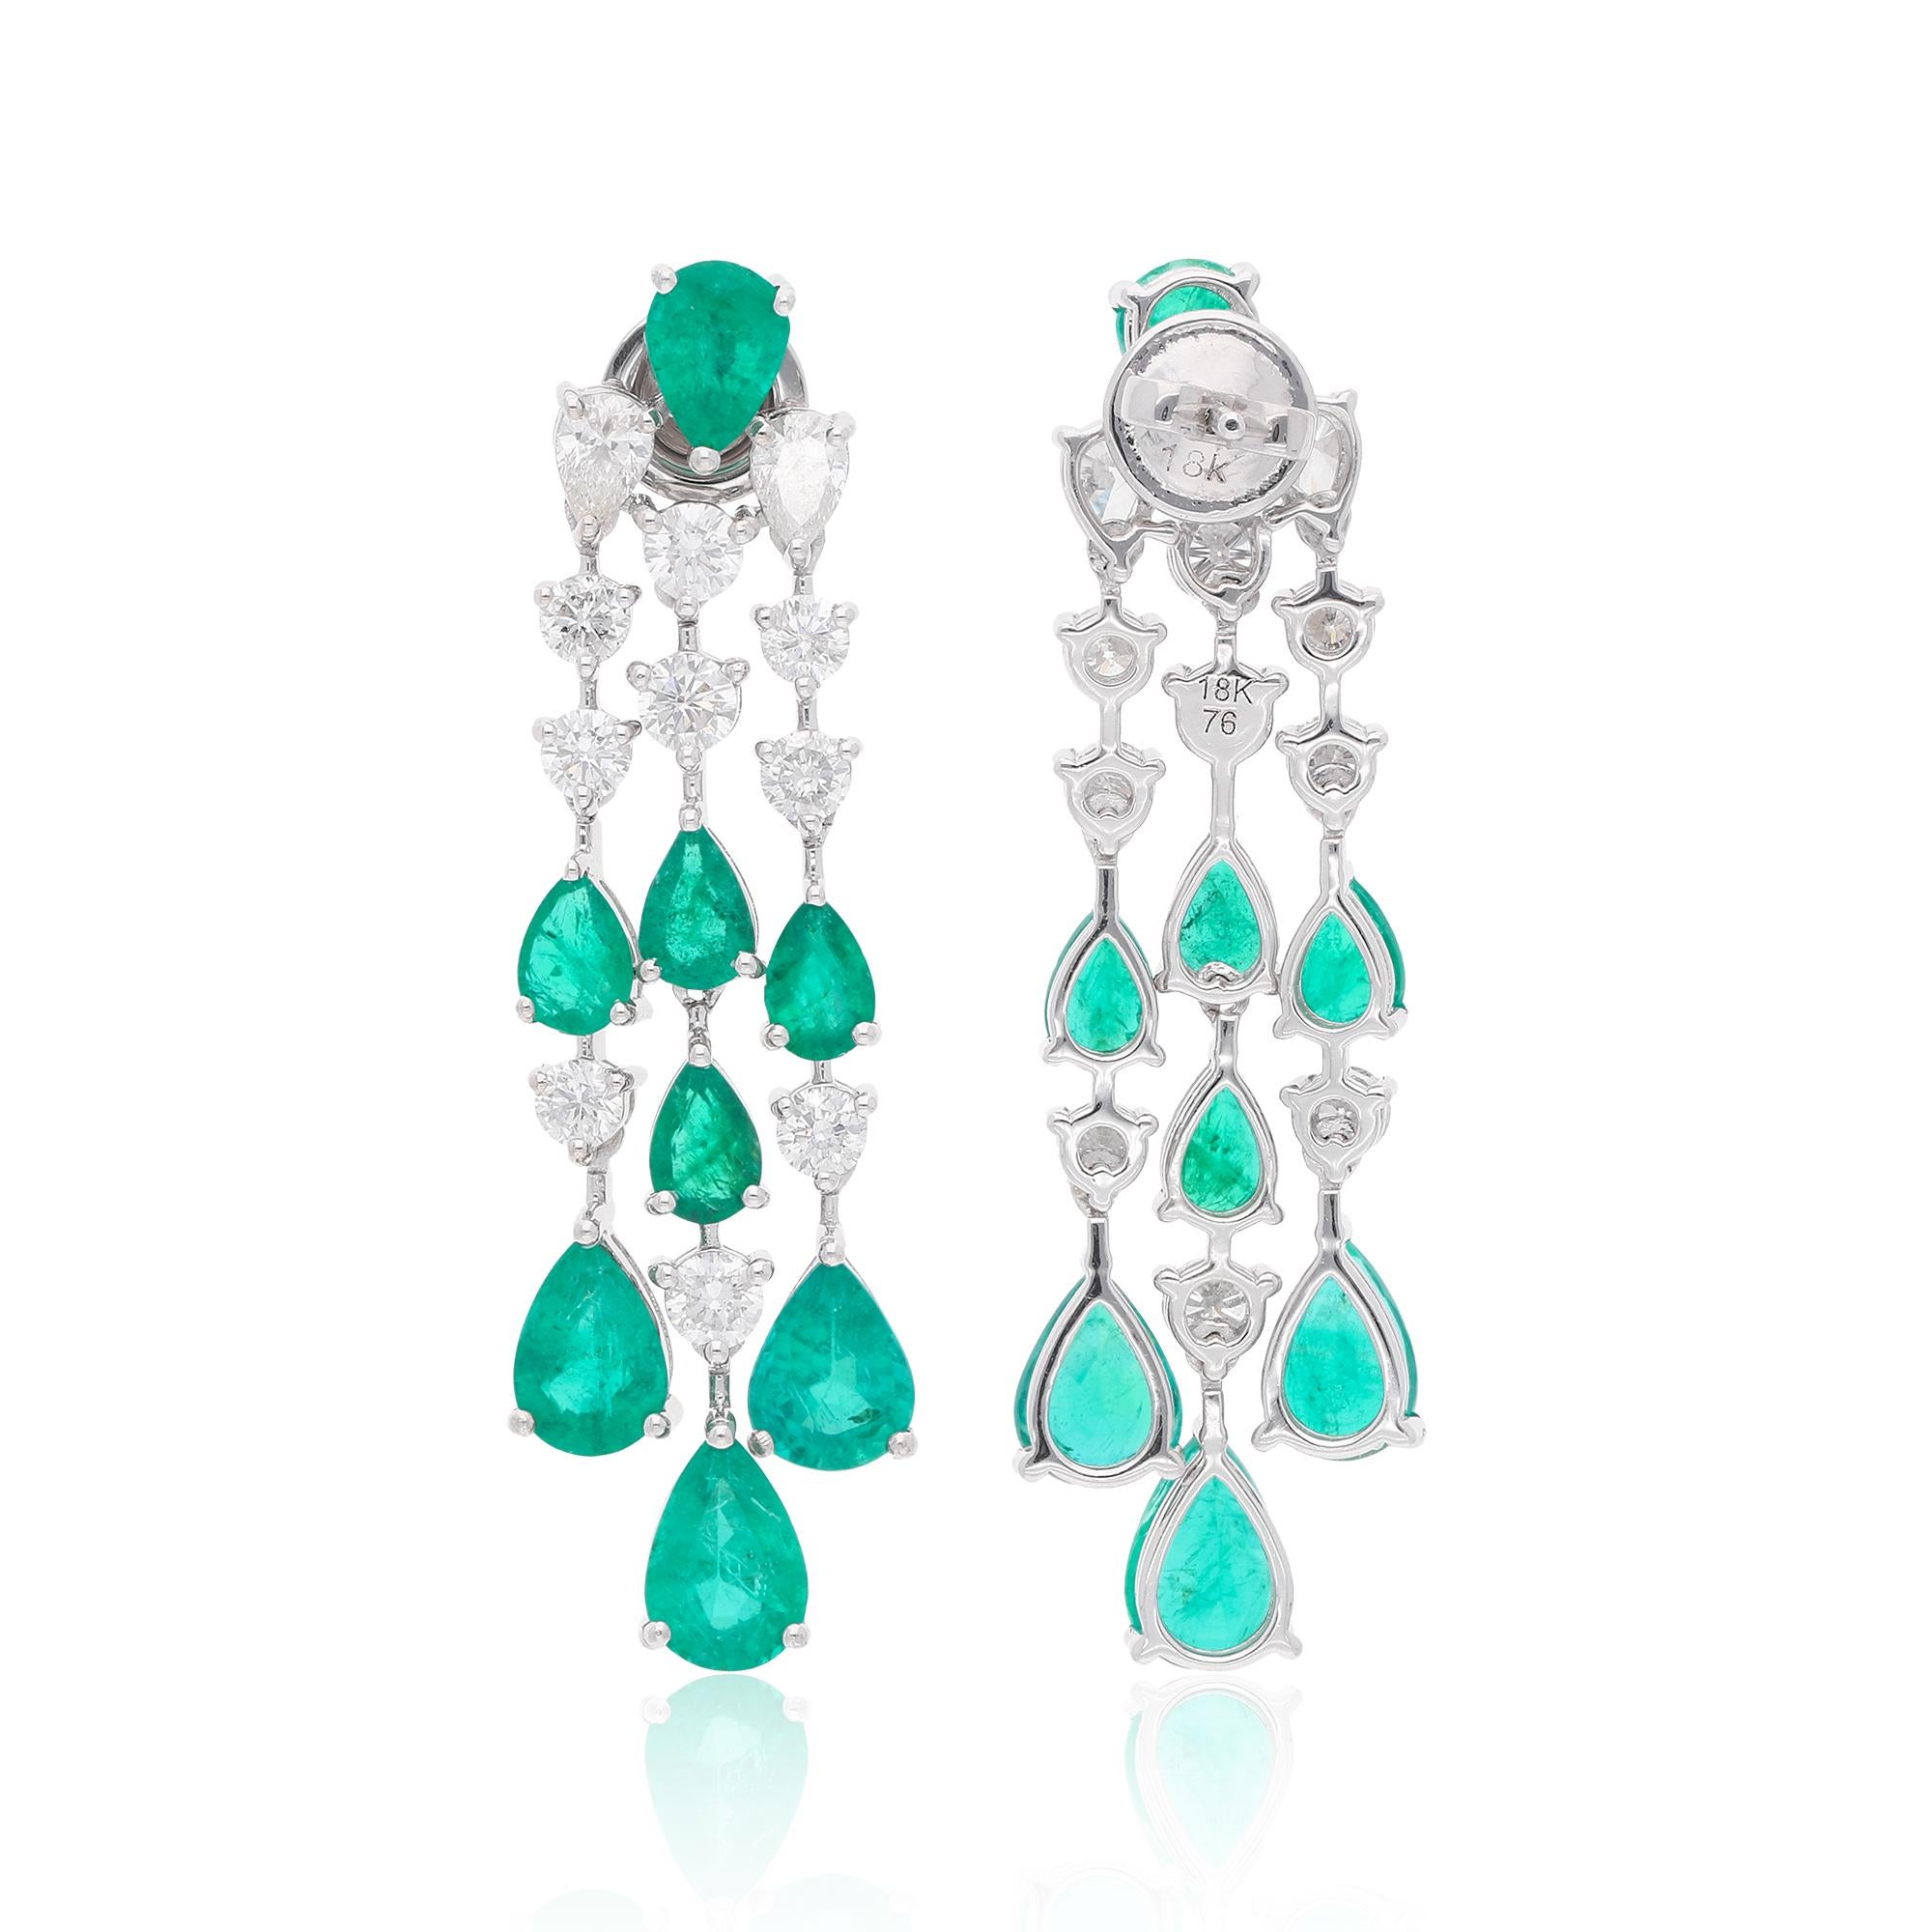 Item Code :- SEE-12678
Gross Wt. :- 13.84 gm
18k Solid White Gold Wt. :- 11.25 gm
Natural Diamond Wt. :- 3.36 Ct. ( AVERAGE DIAMOND CLARITY SI1-SI2 & COLOR H-I )
Zambian Emerald Wt. :- 9.59 Ct.
Earrings Size :- 14 x 48 mm approx.

✦